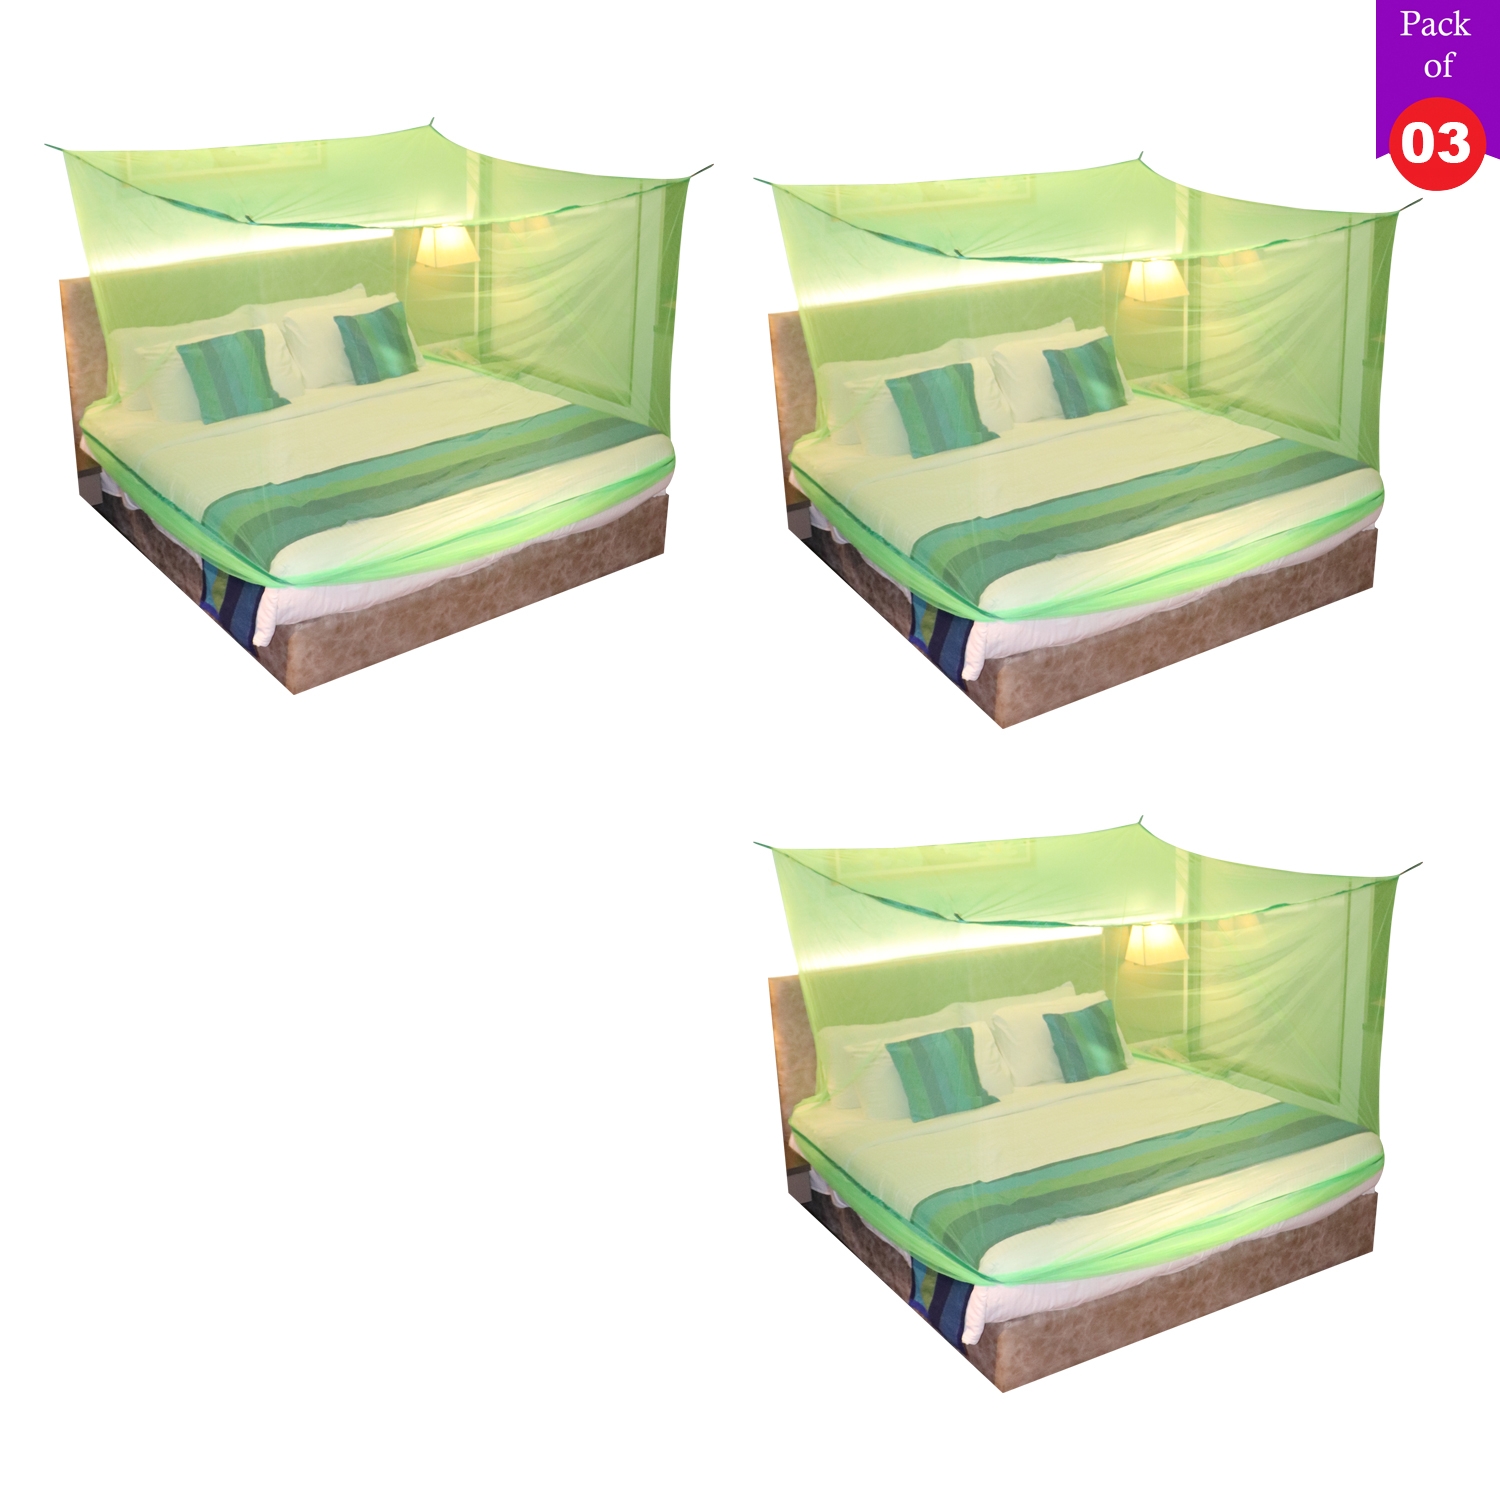 Paola Jewels | Mosquito Net for Double Bed, King-Size, Square Hanging Foldable Polyester Net Green Pack of 3 2